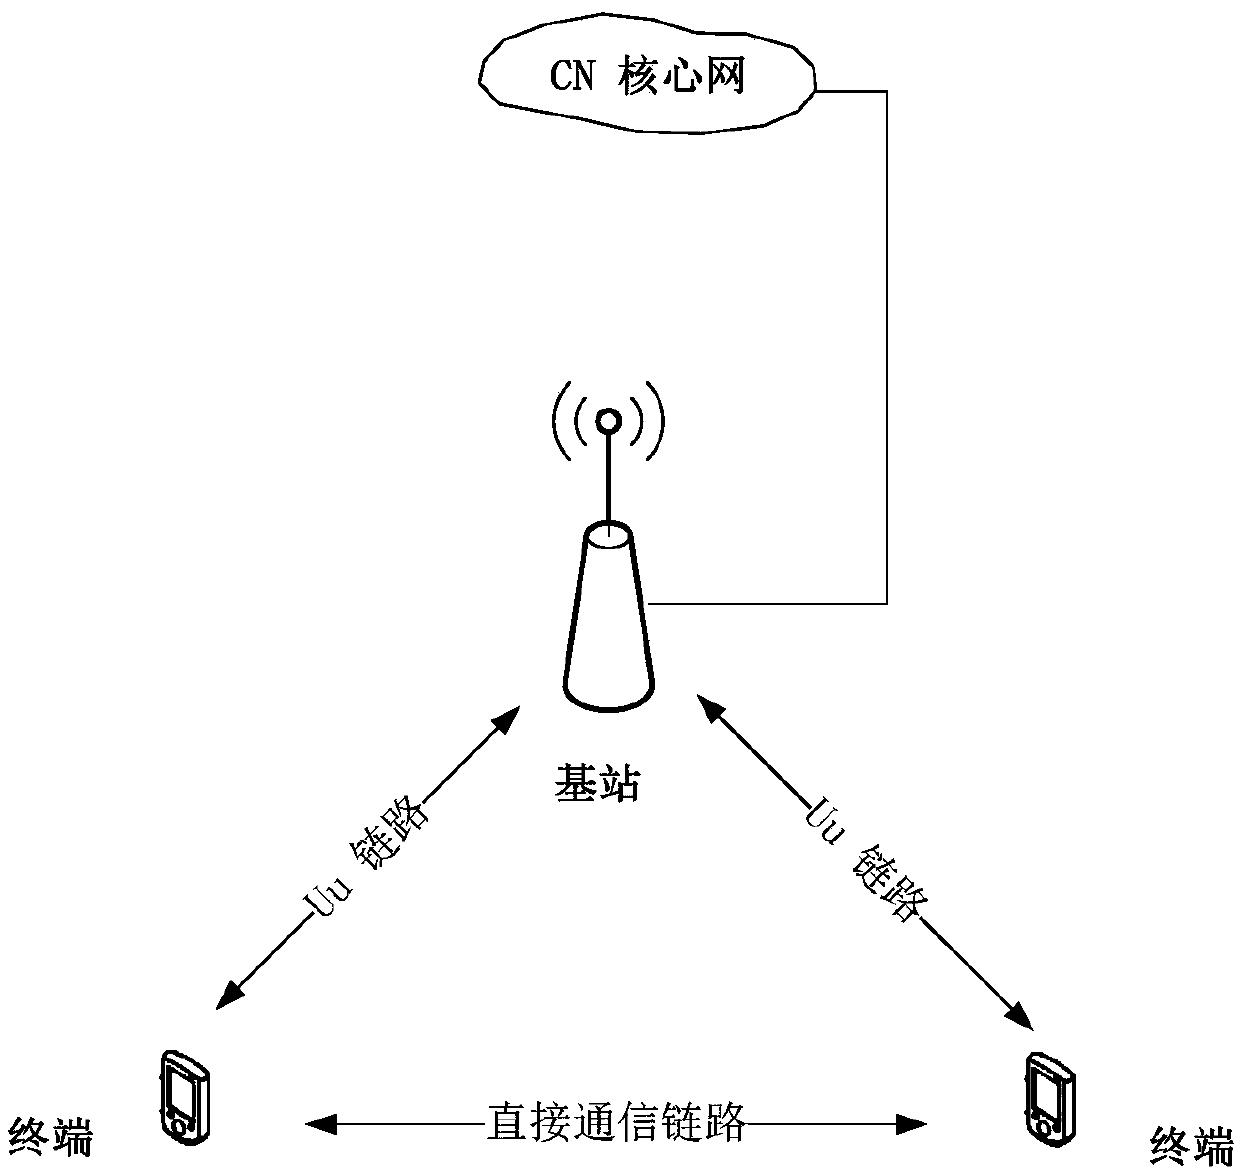 Direct communication link resource allocation method and terminal